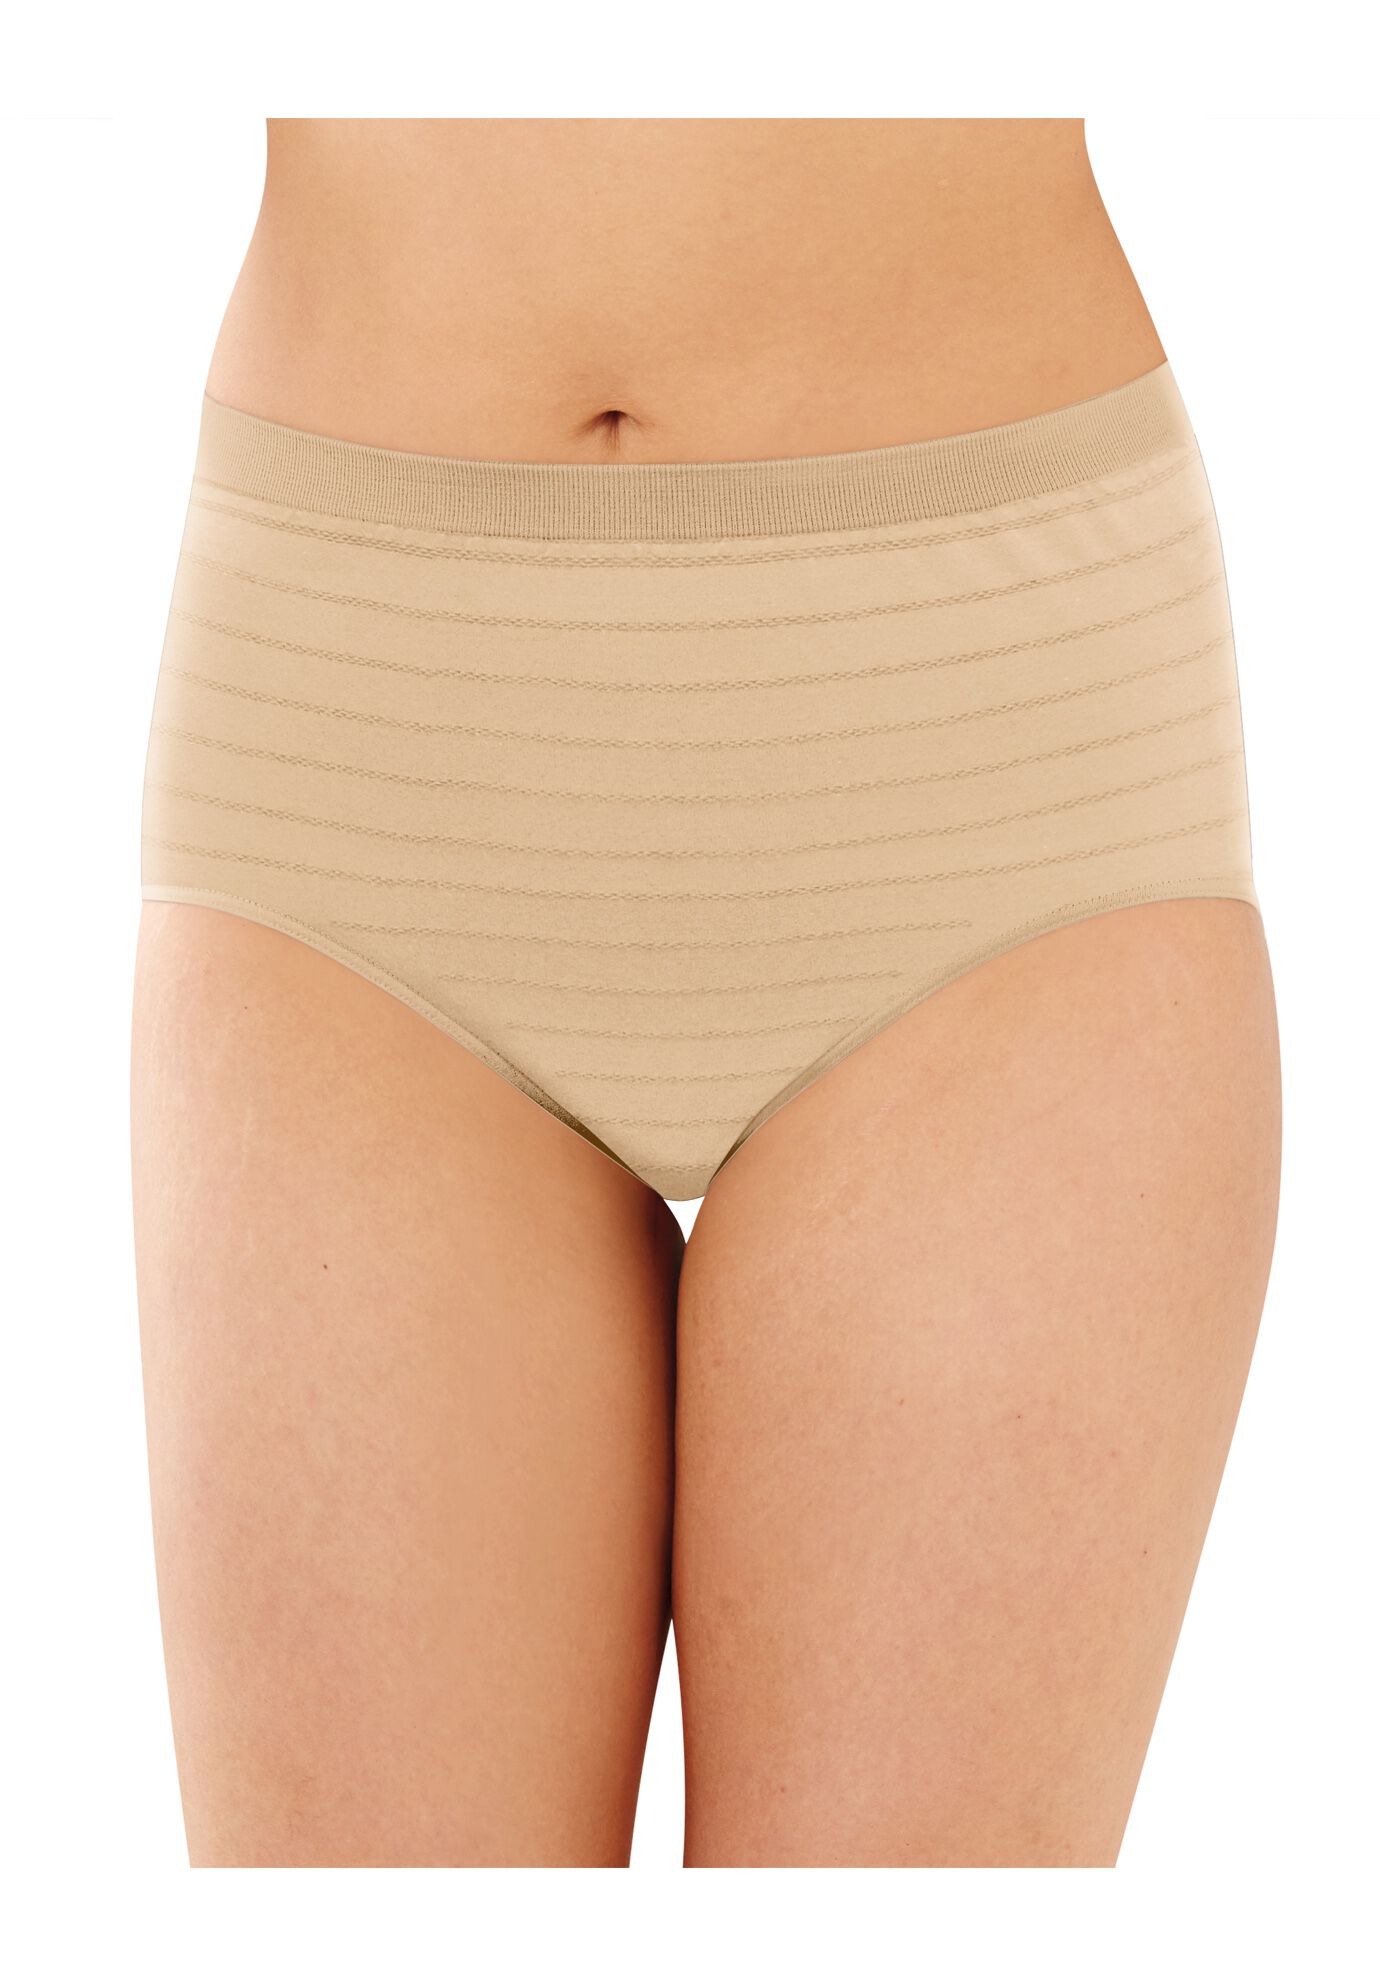 Plus Size Women's Comfort Revolution Brief by Bali in Soft Taupe Stripe (Size 11)